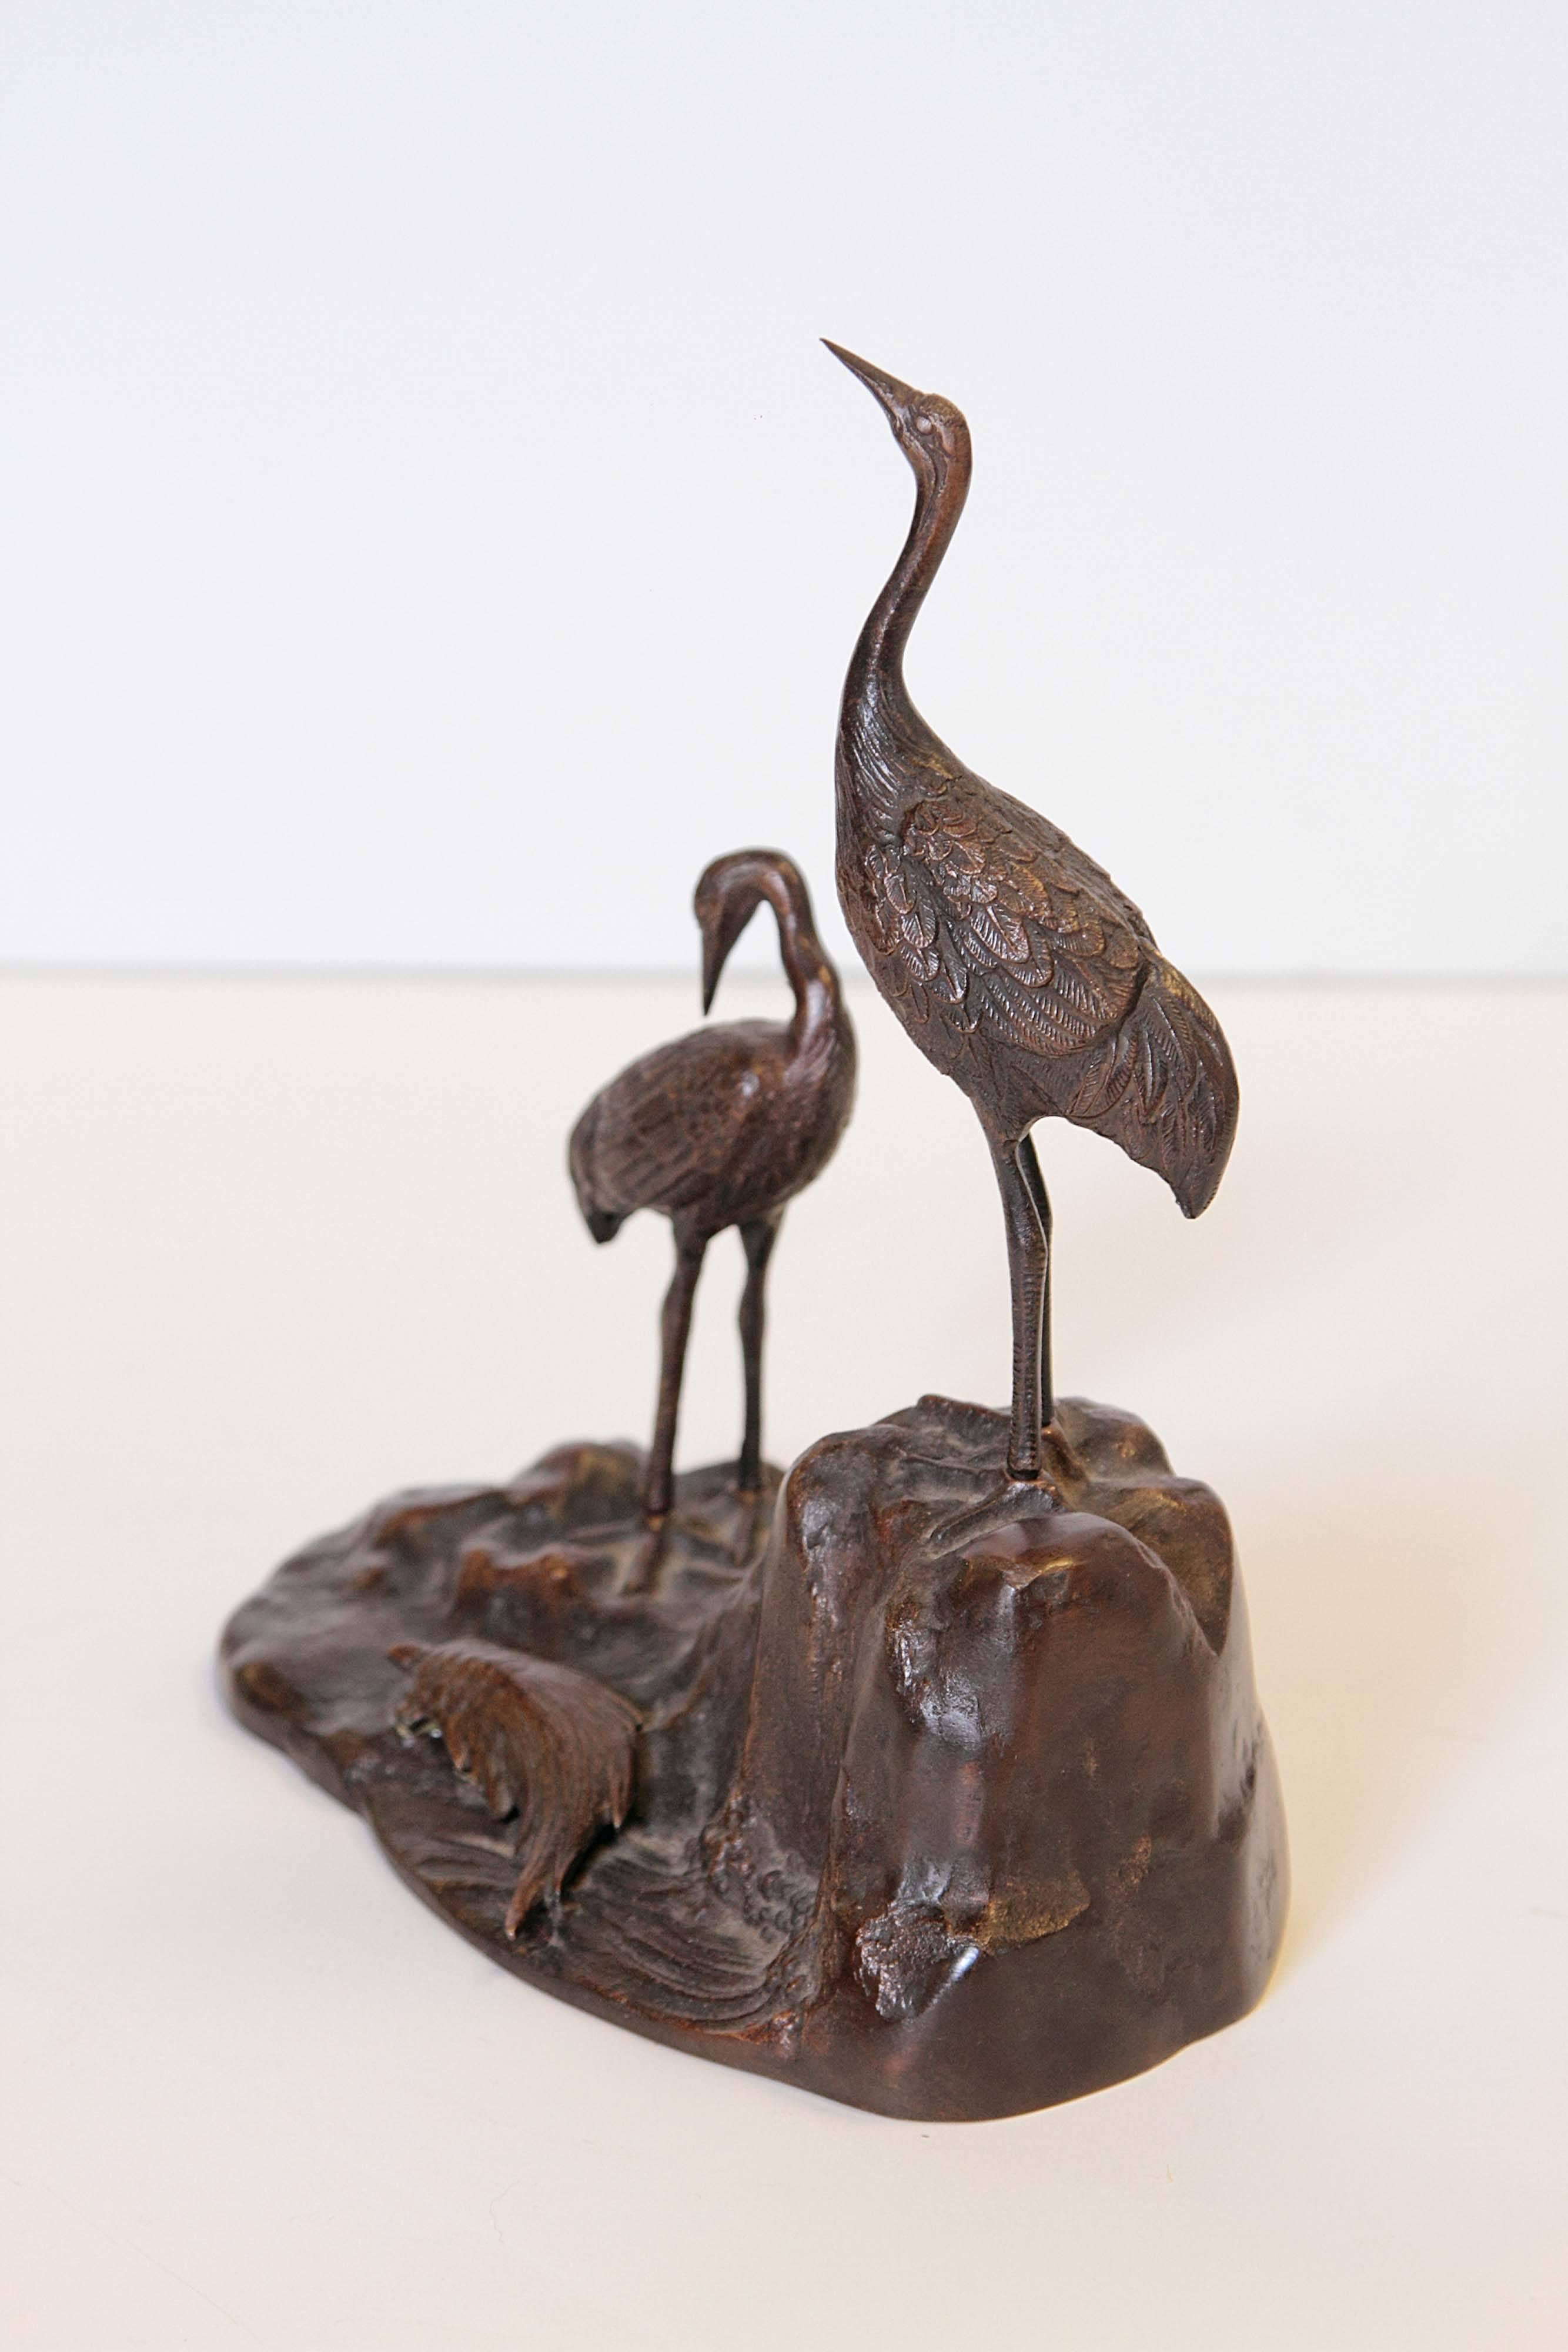 Bronze sculpture of Japanese cranes on a rocky shoreline. A small mminogame, a Japanese mythological long-tailed turtle, is also depicted emerging from the surf onto the rocks.